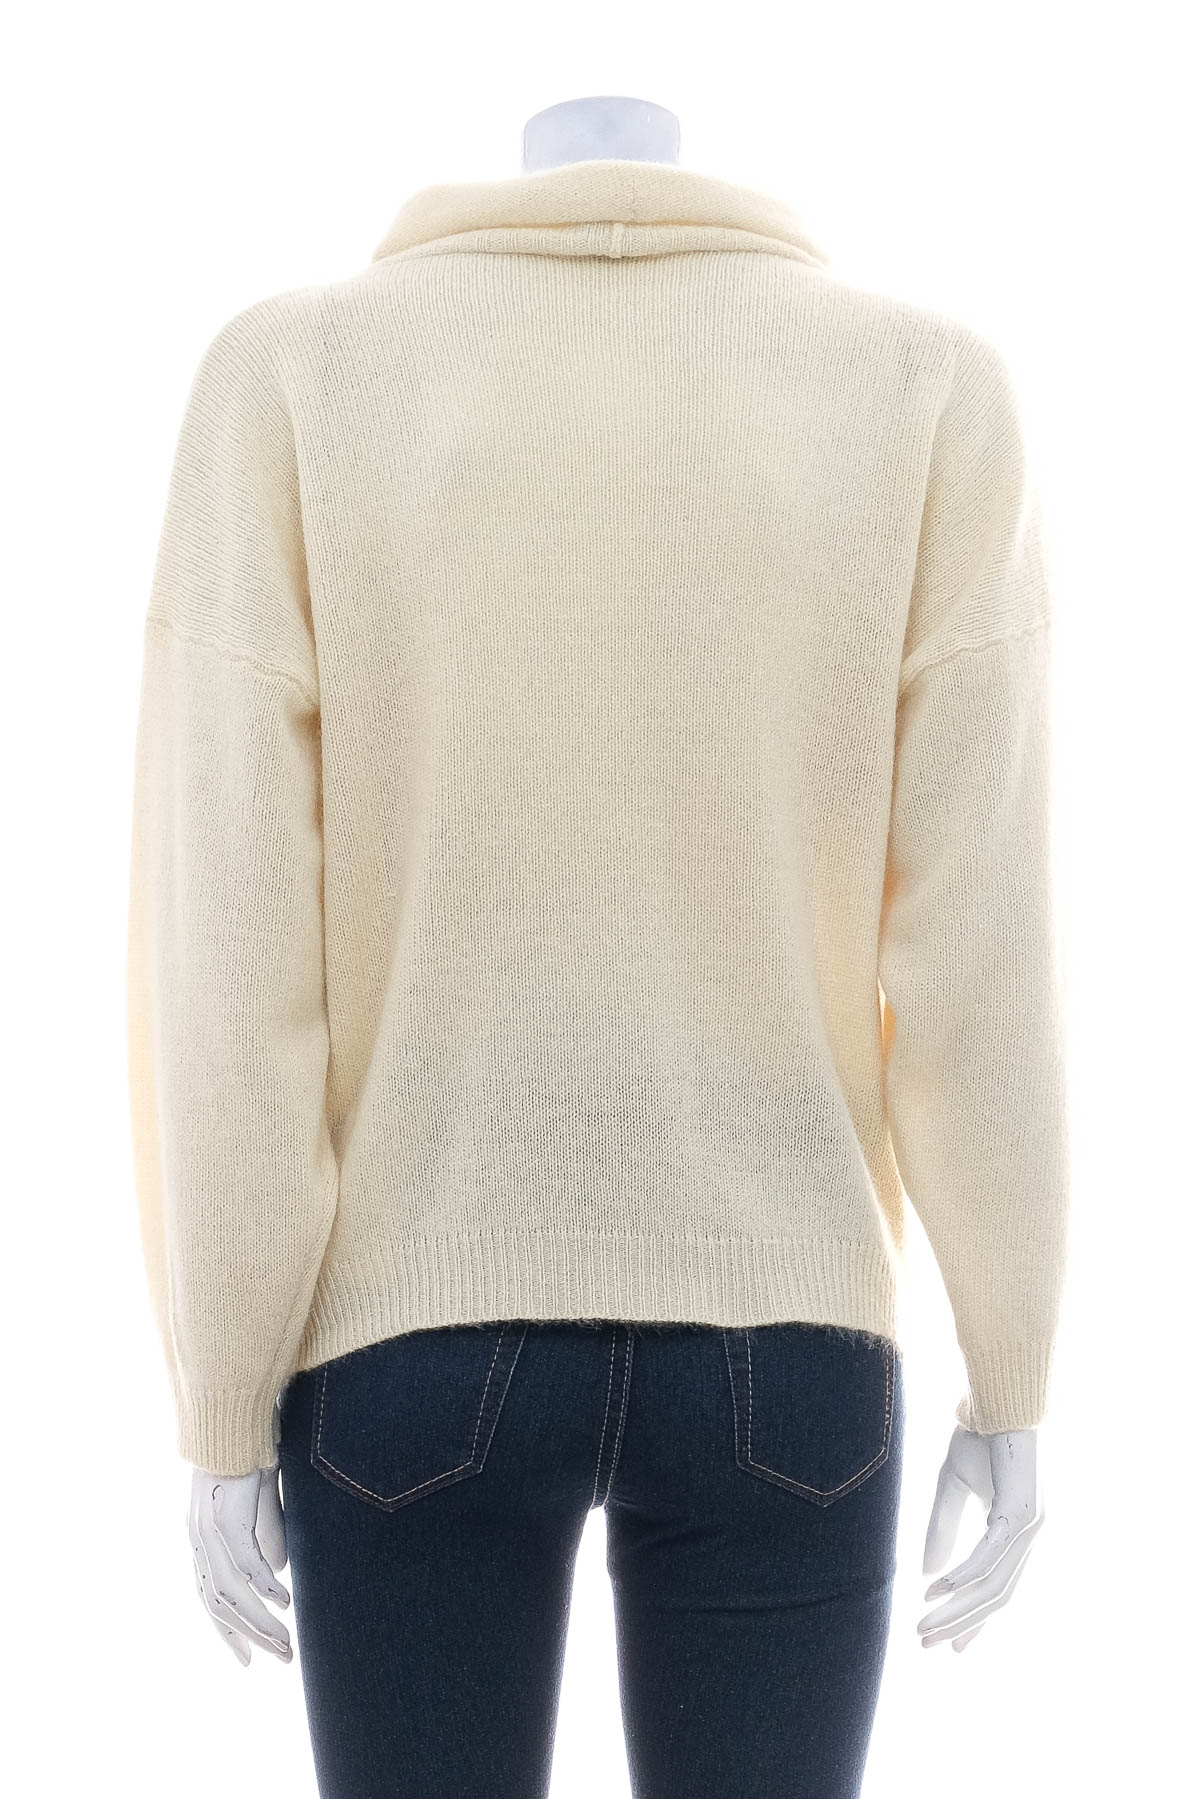 Women's sweater - Anny Cp. - 1